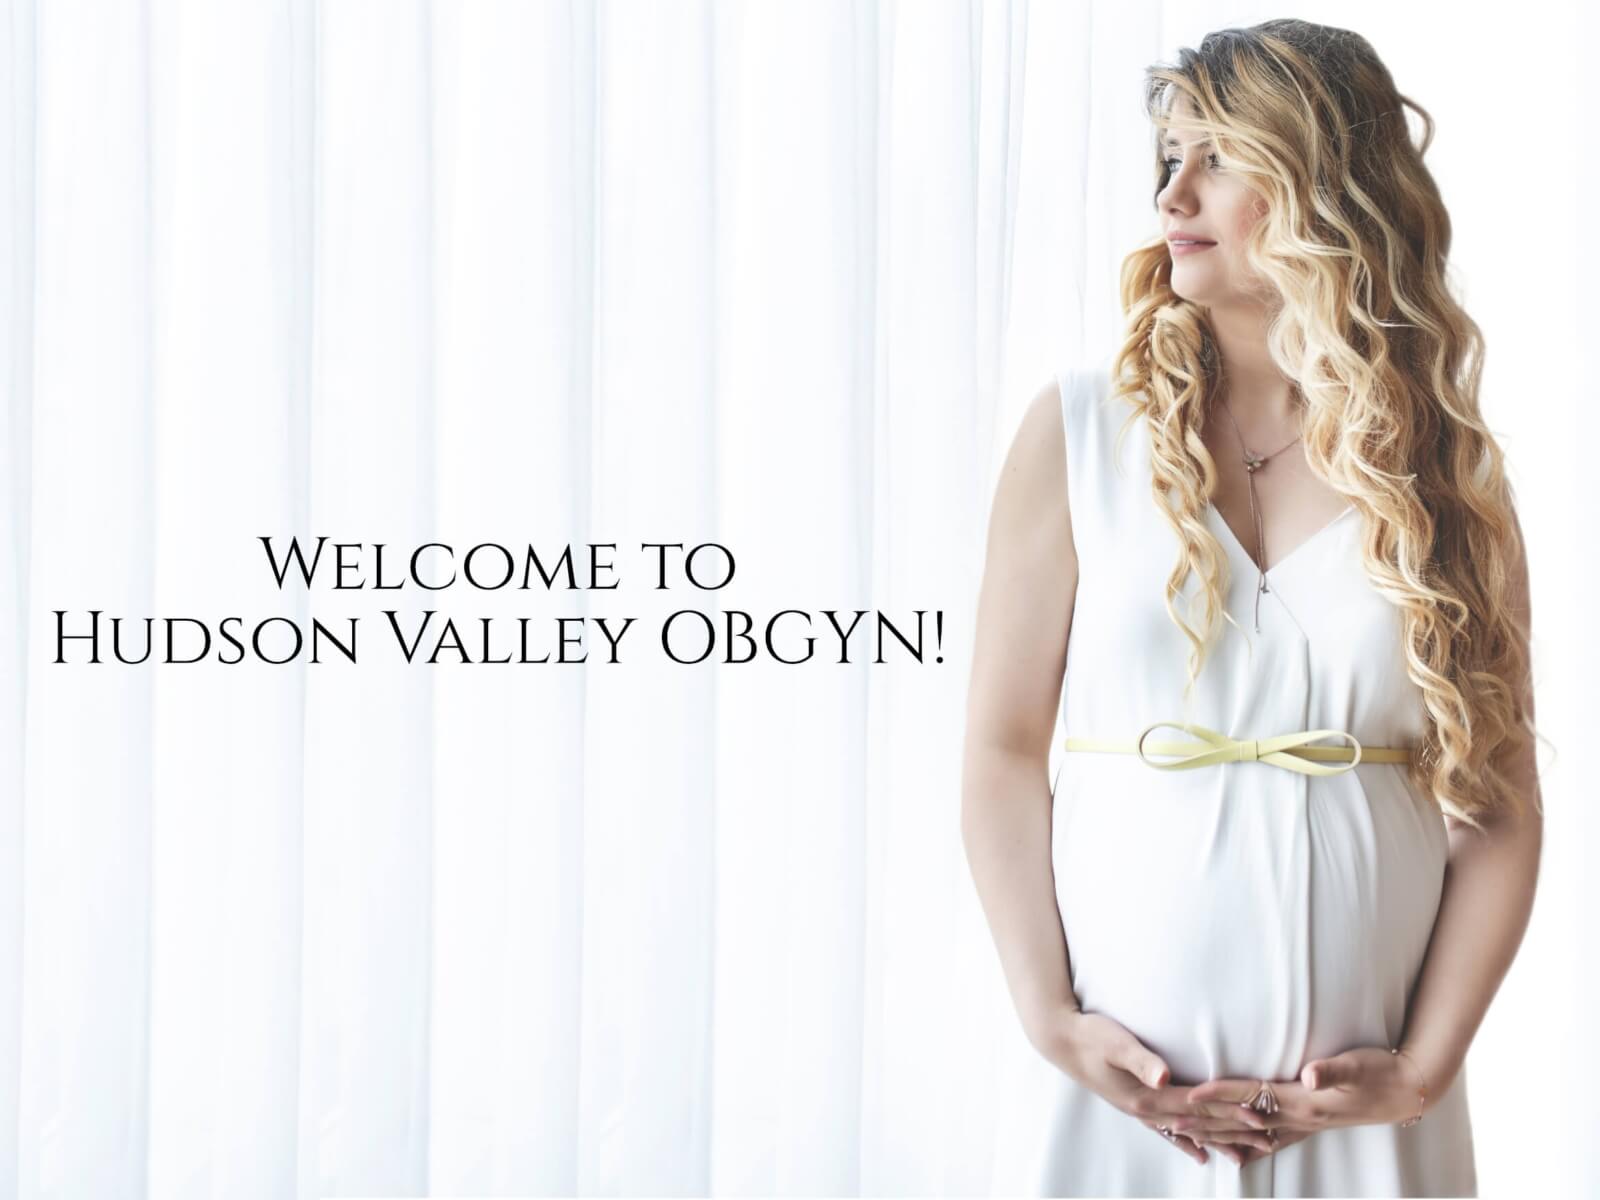 Welcome to Hudson Valley OBGYN!